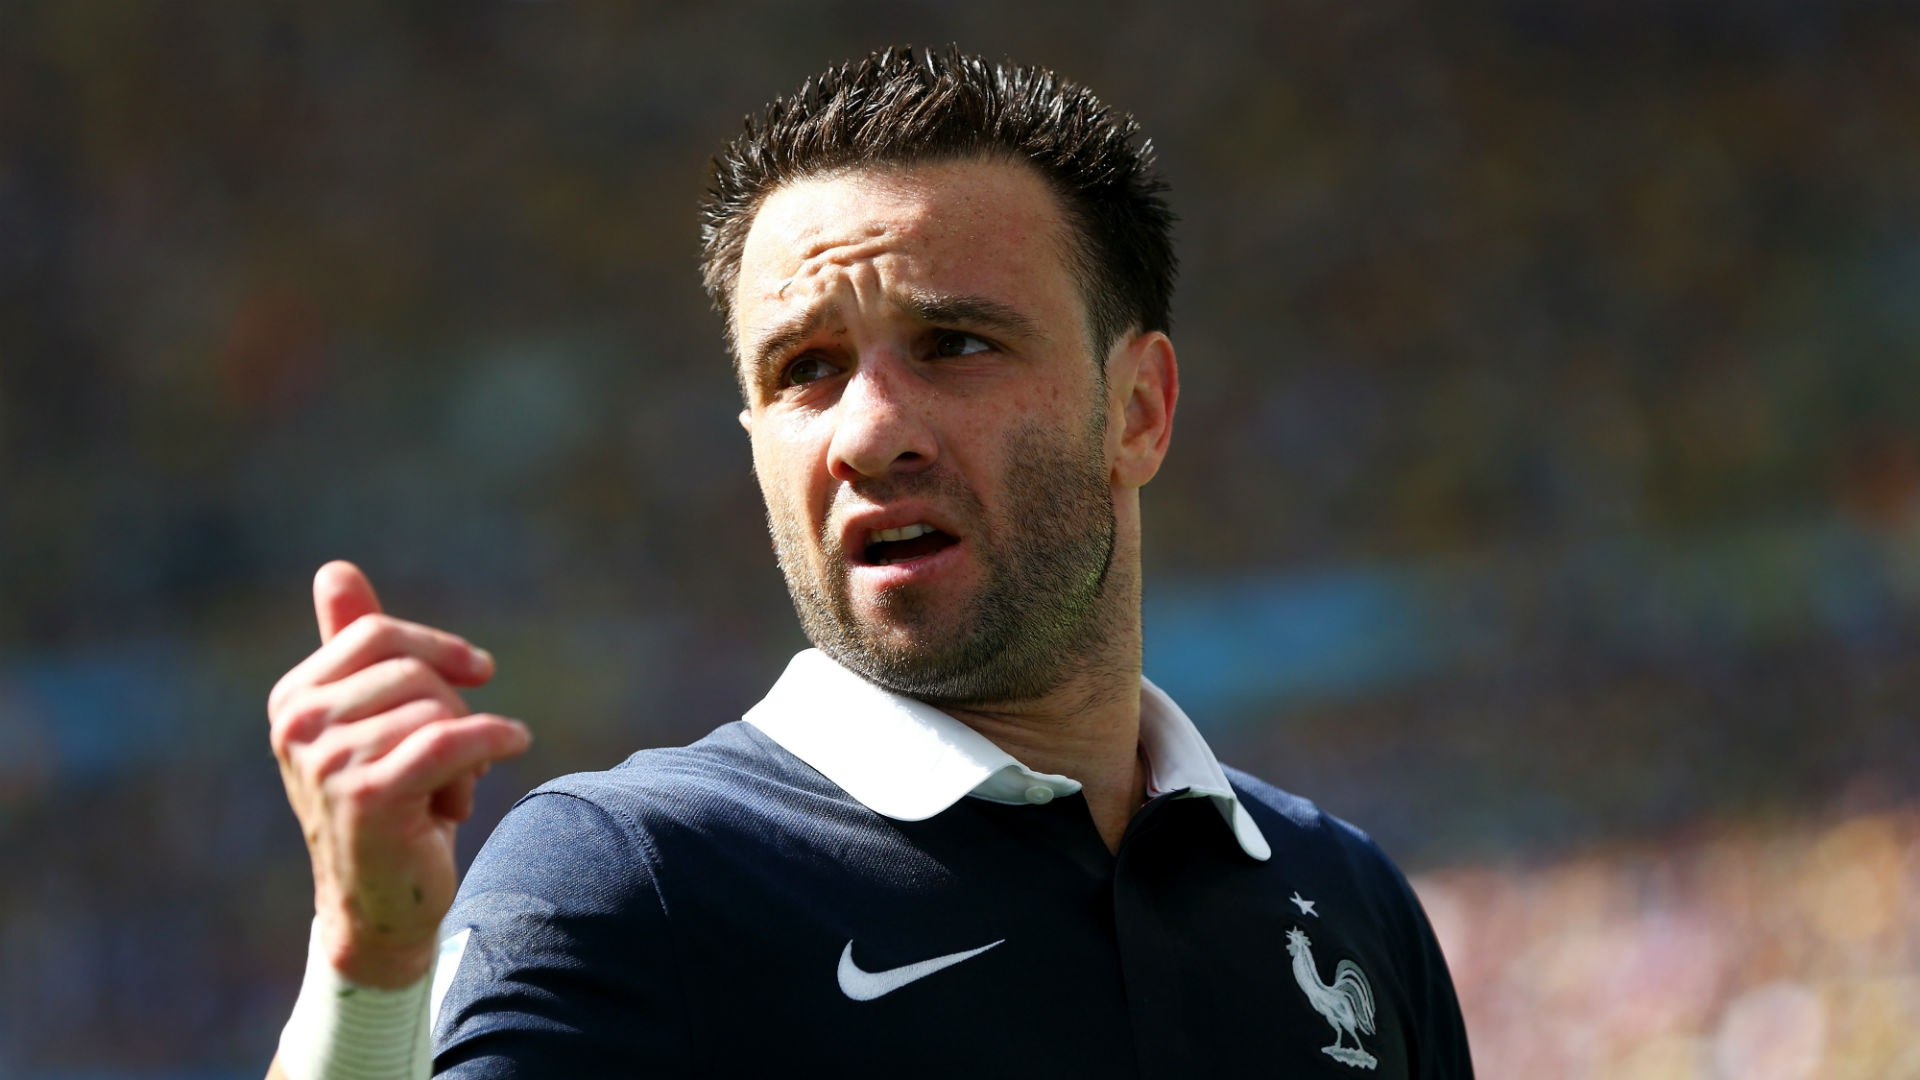 Valbuena also acknowledged the strength of Fenerbahce's team roster as a whole. Some of the team's most well-known players include the likes of  Gregory van der Wiel, Emmanuel Emenike or Volkan Sen.